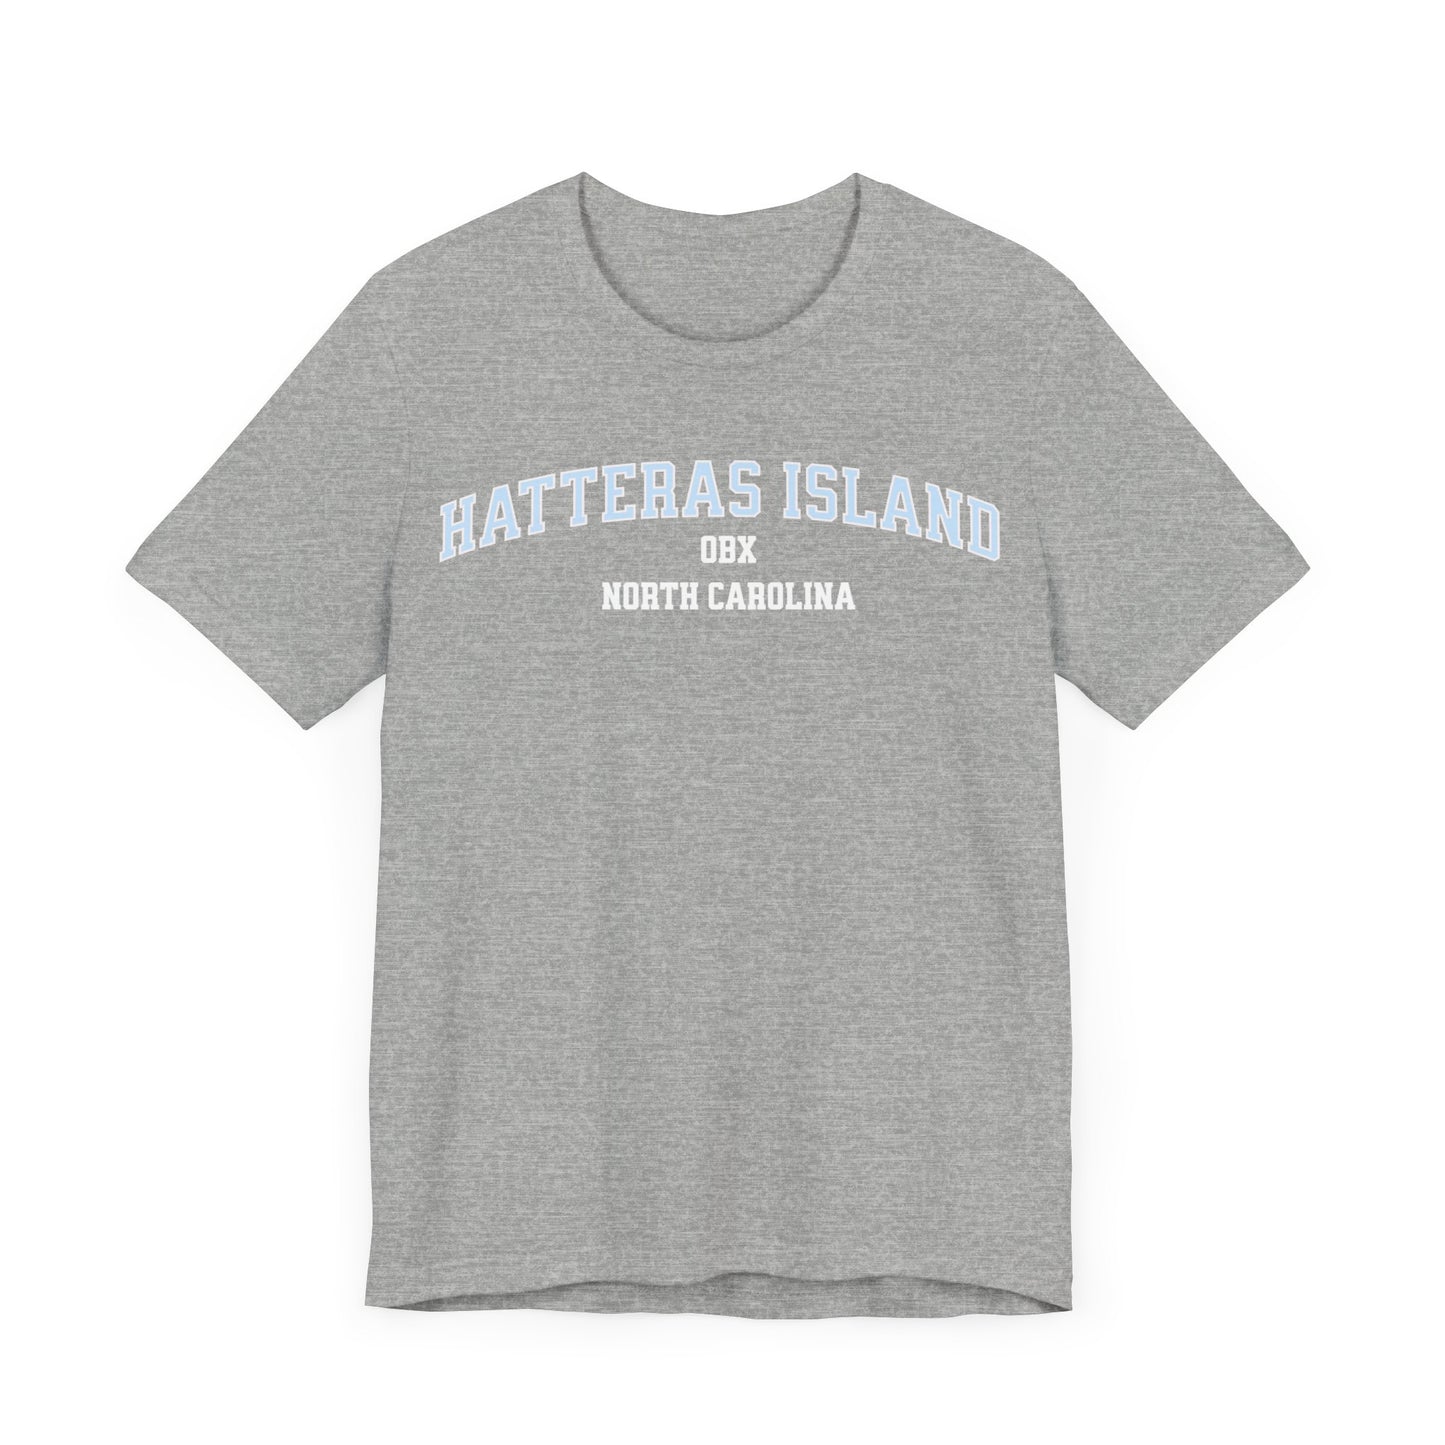 Hatteras Island Outer Banks T-Shirt